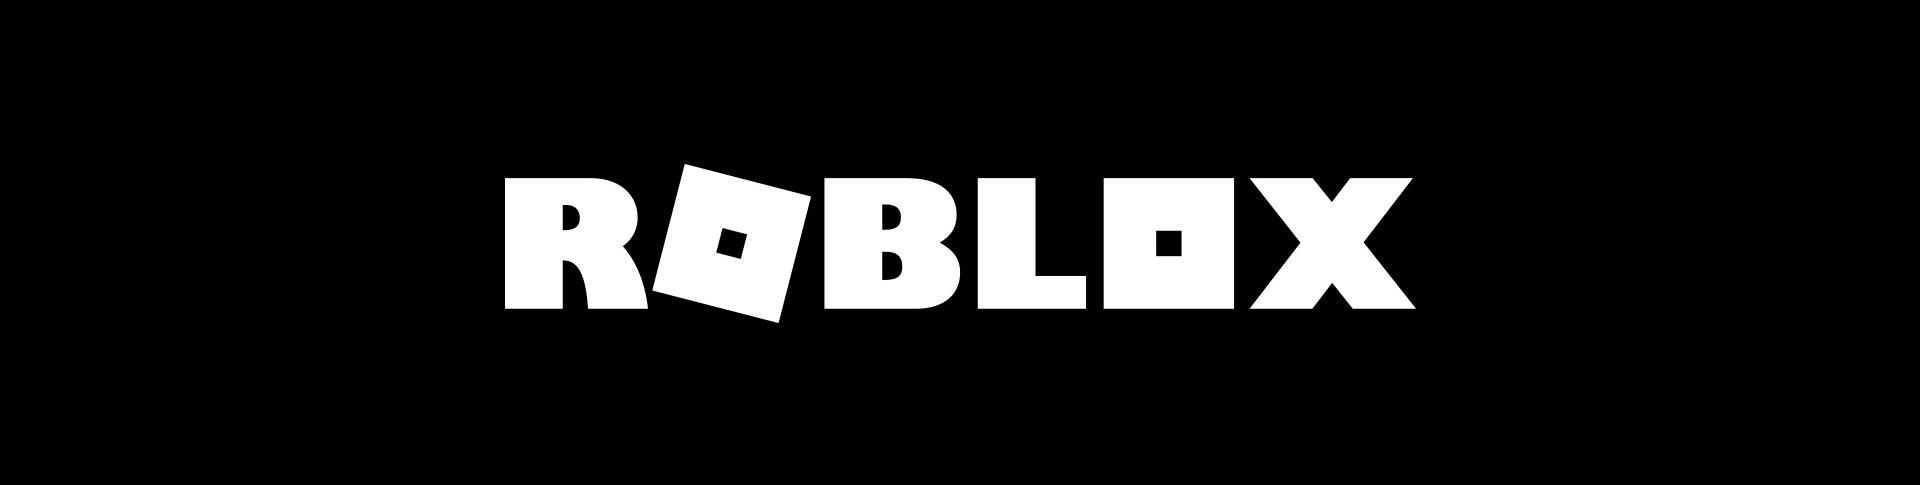 The Roblox logo in 2020